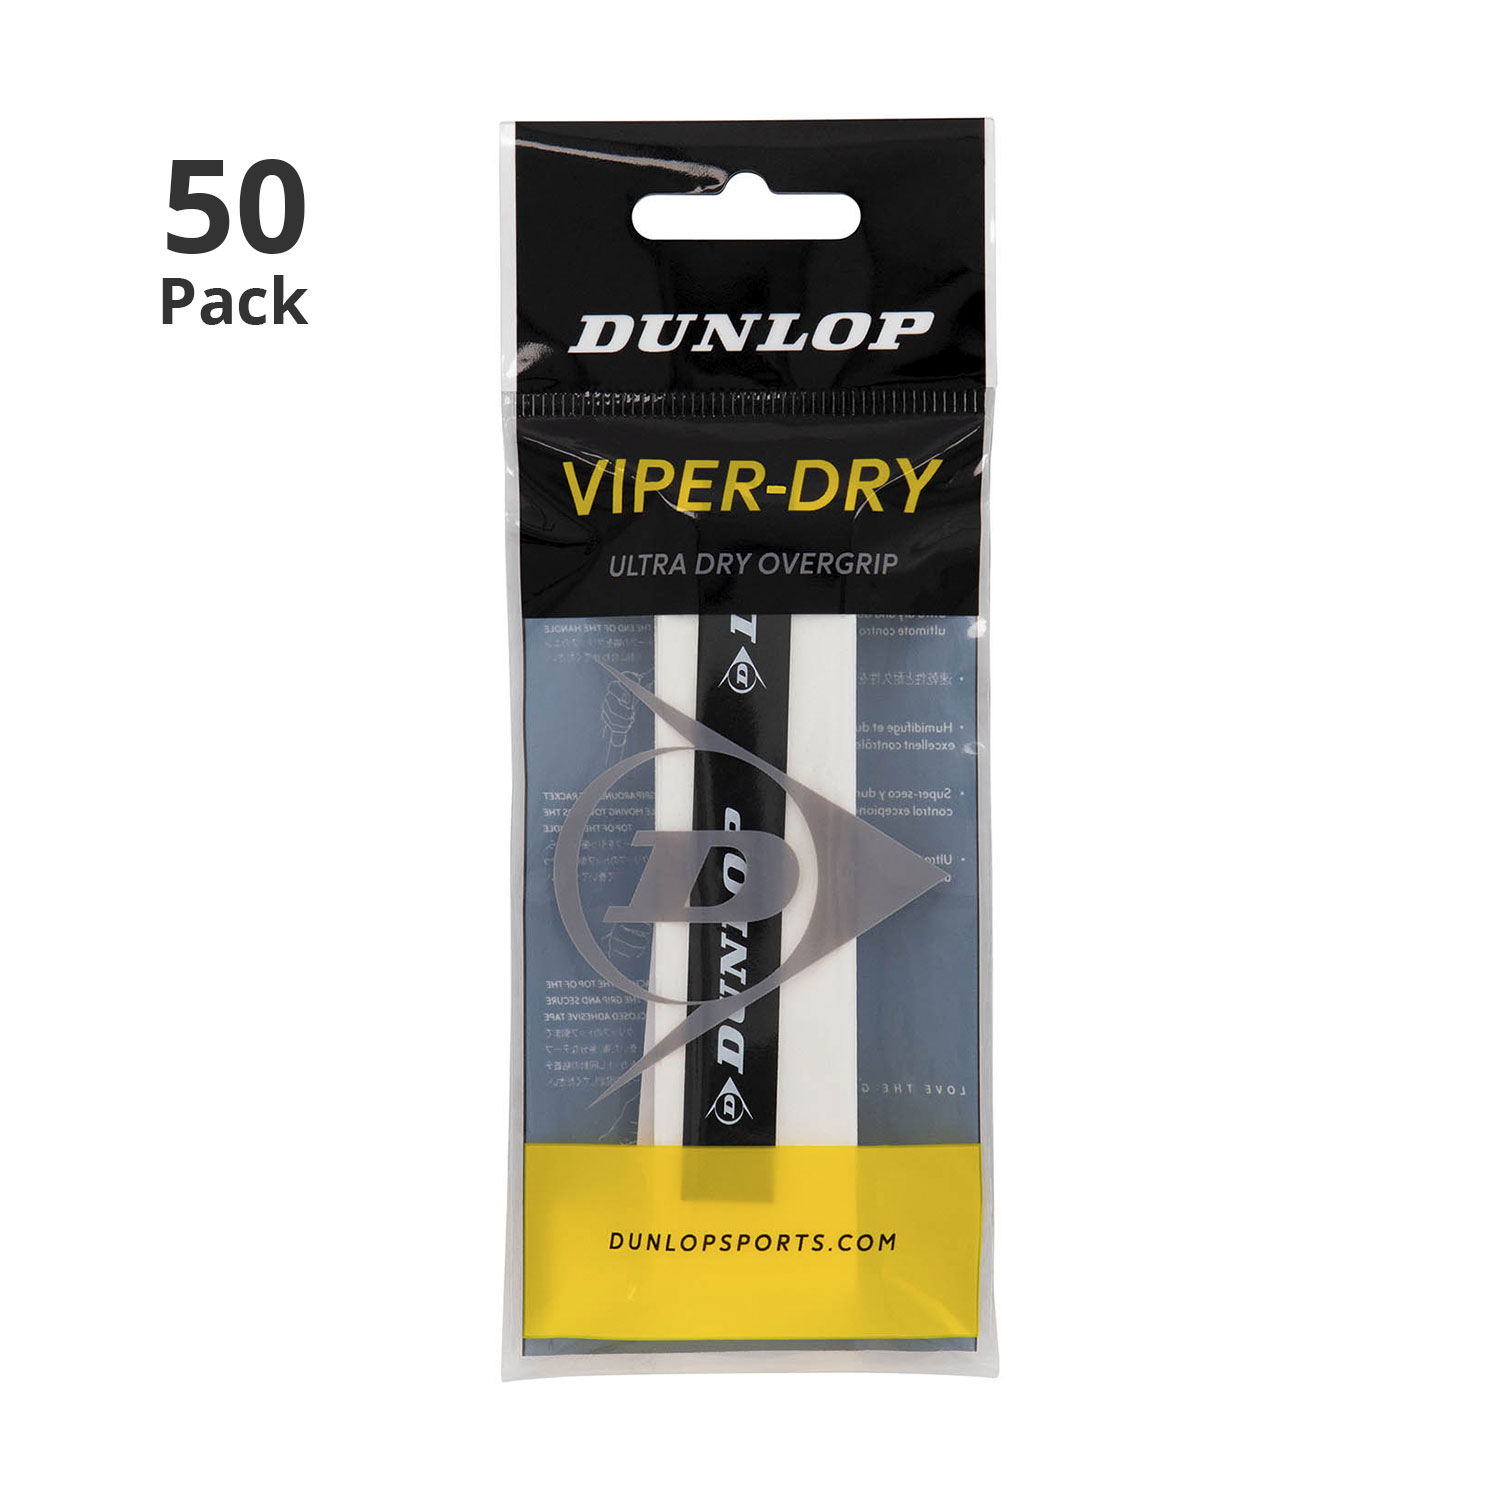 Dunlop ViperDry Overgrip x 50 Pack - White